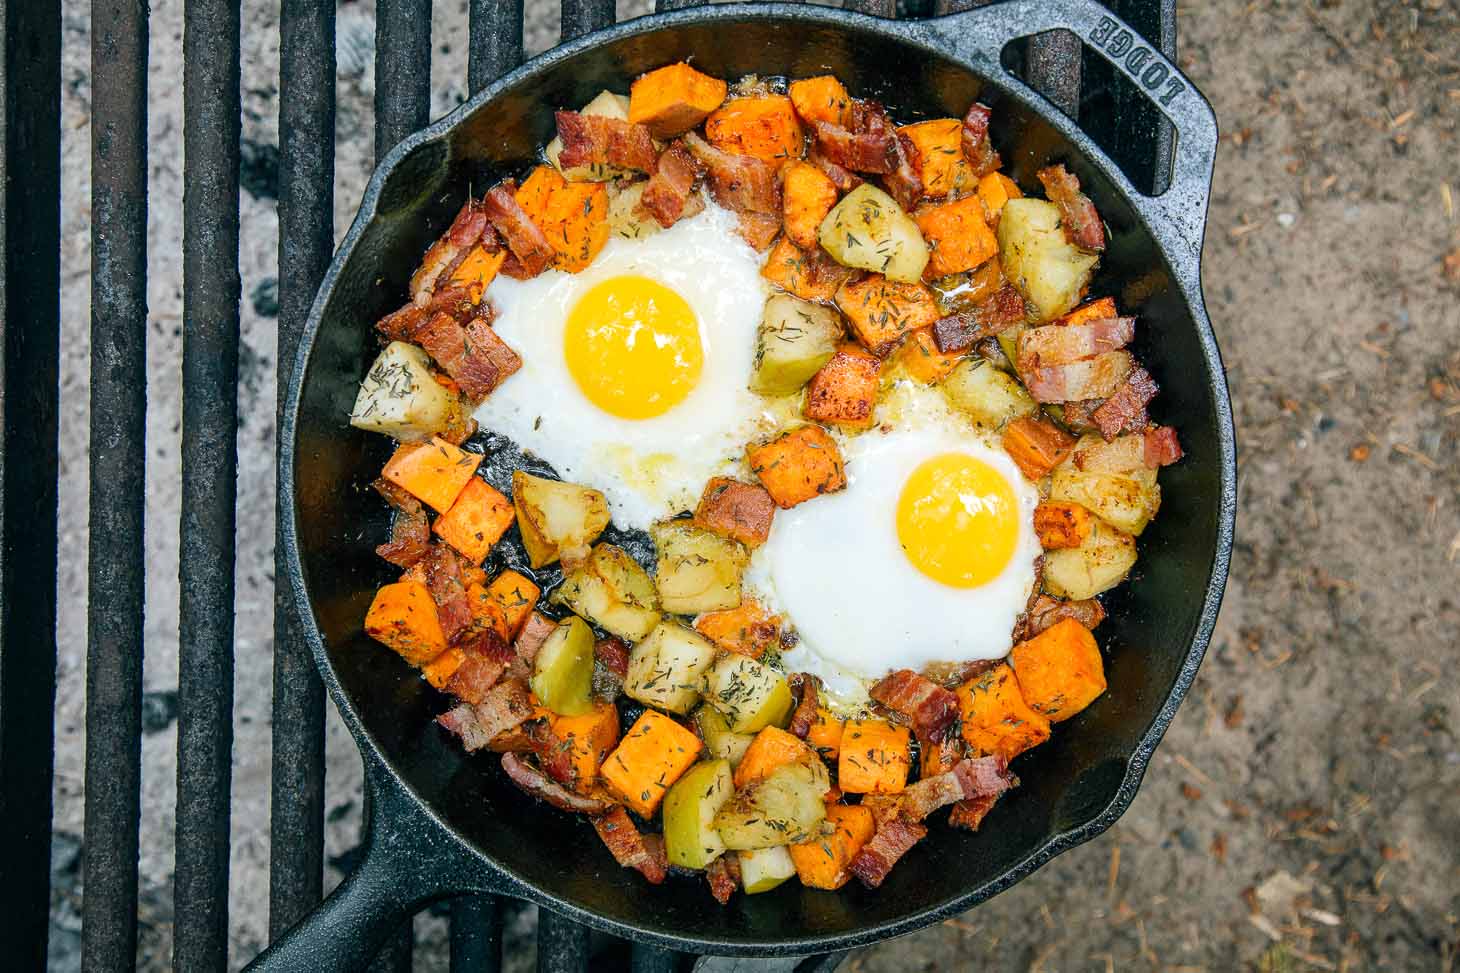 Cast iron skillet of sweet potato hash with eggs.